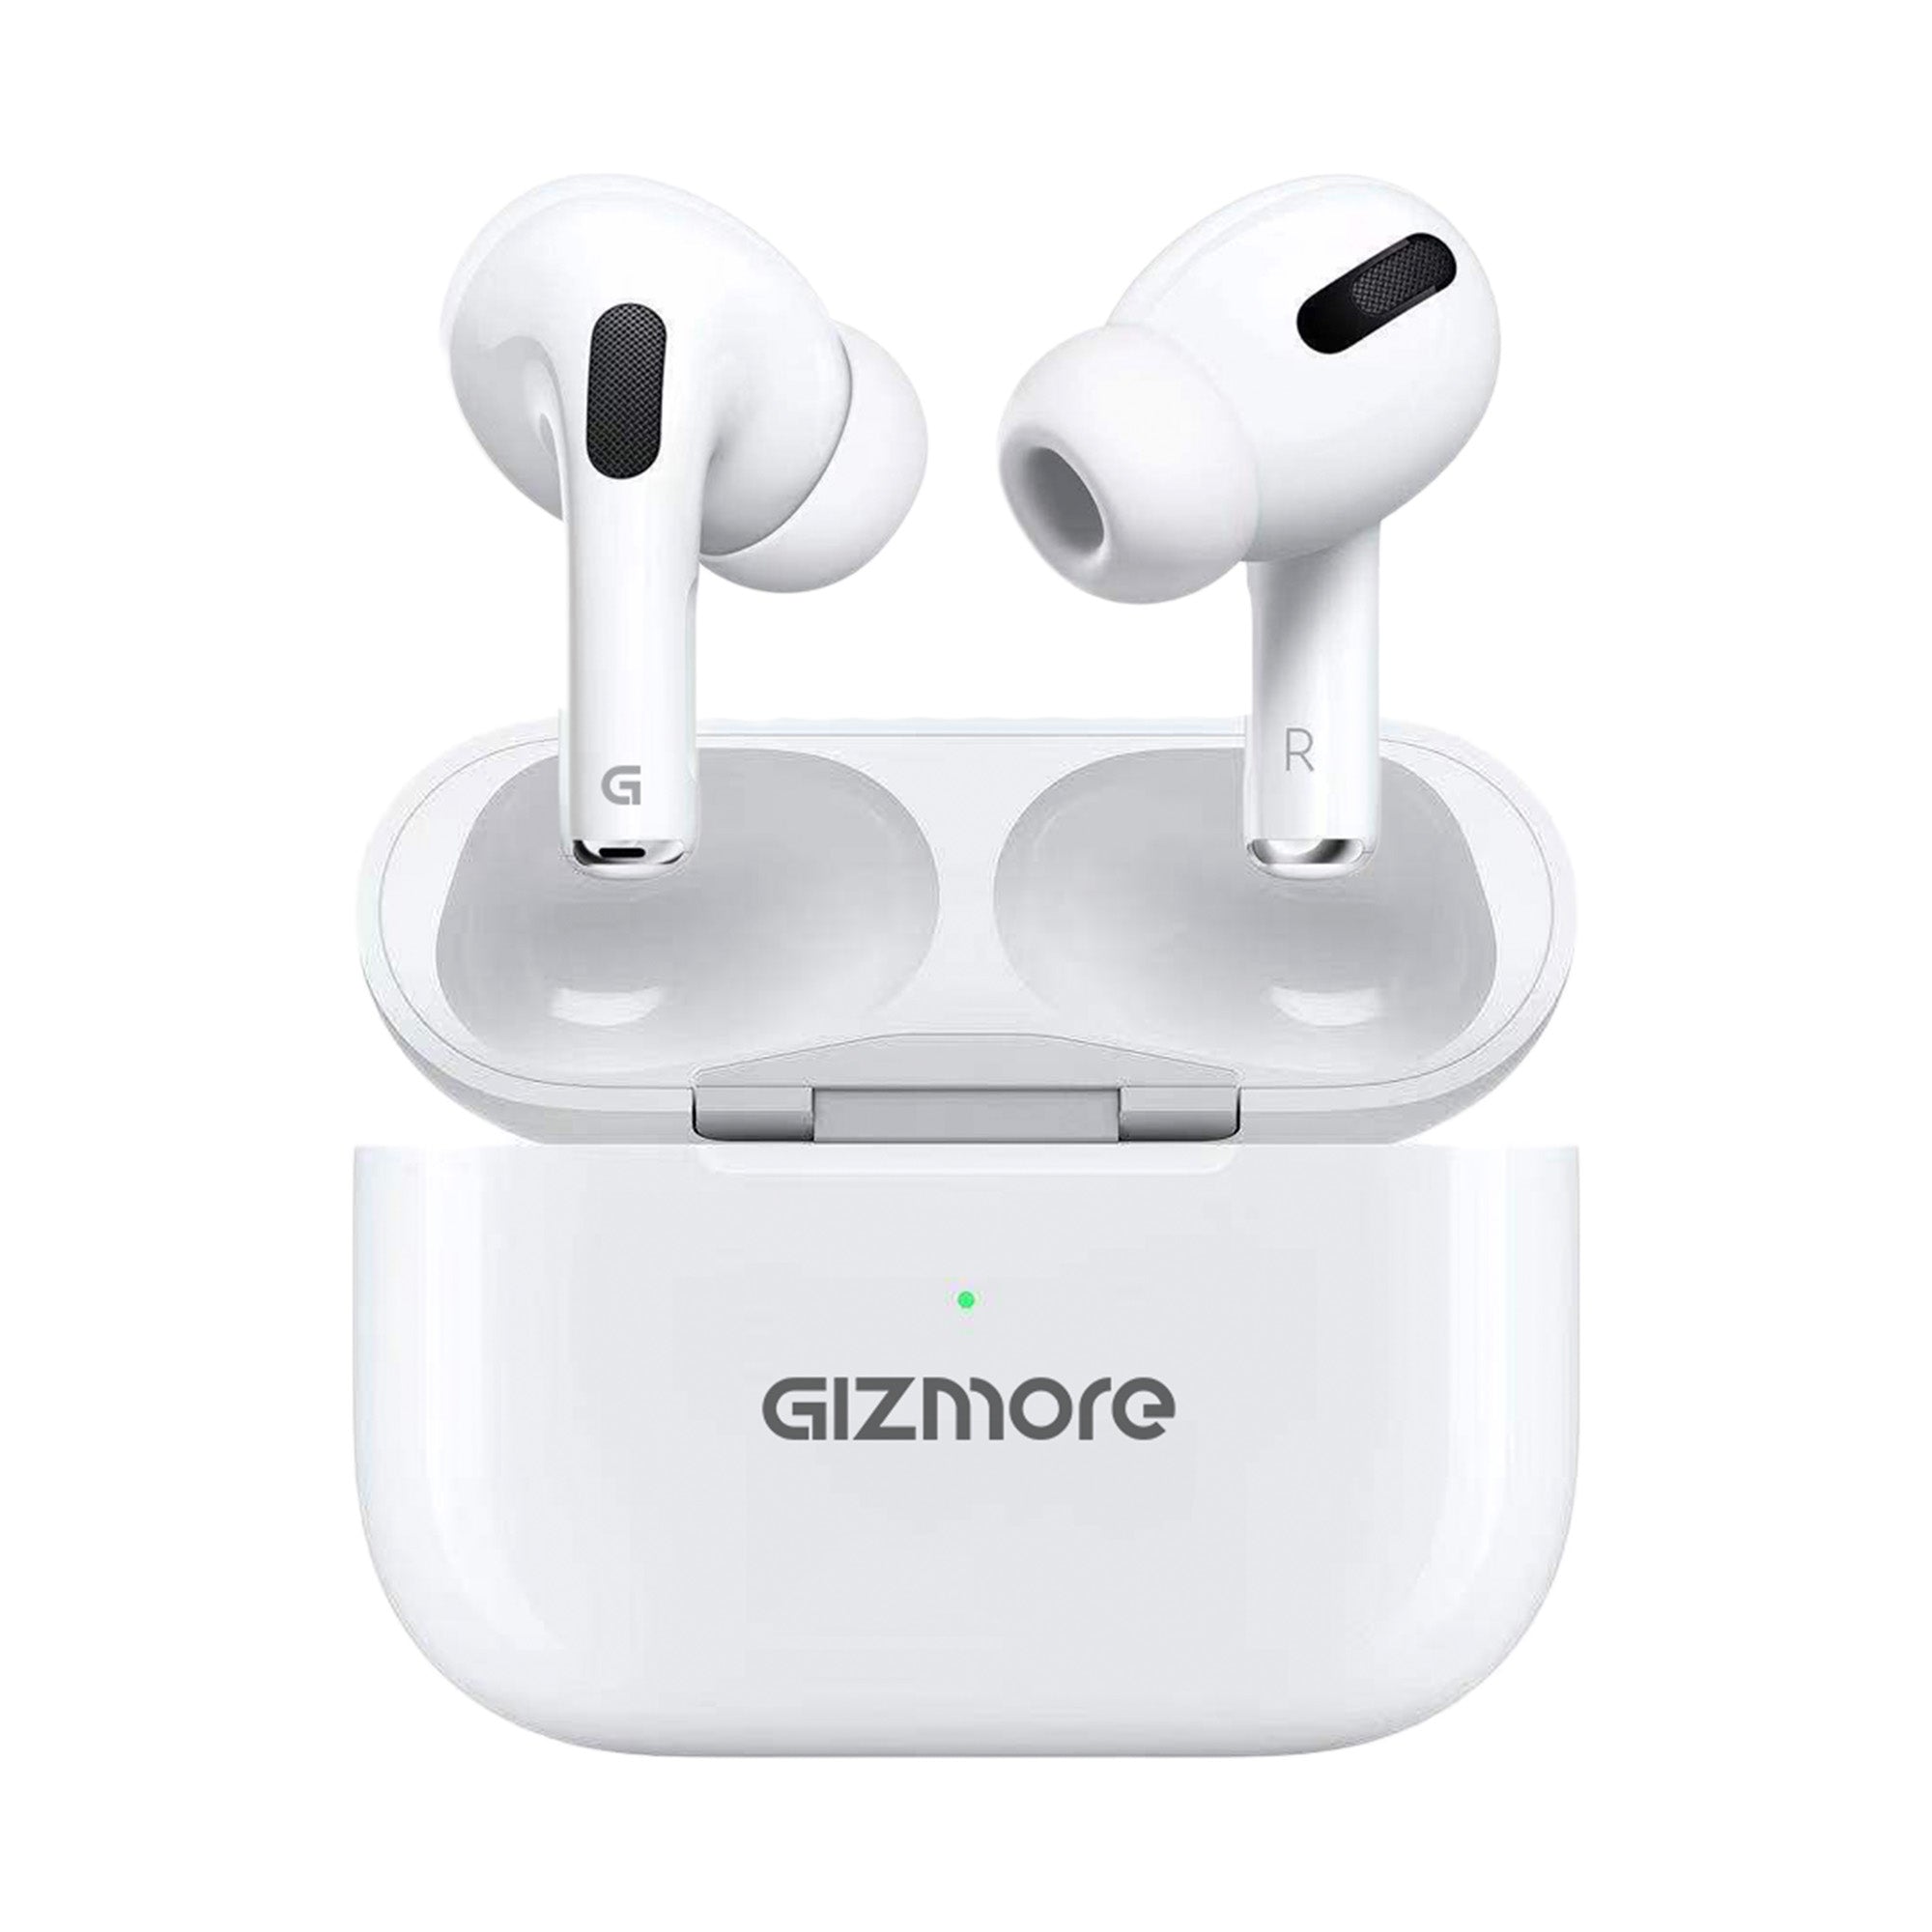 GIZMORE 862 TWS In-Ear Earbuds Type-C Fast Charging with 12 Hours Playtime & Bluetooth V5.0|13mm Bass Drivers| Sweat & Water Resistant | Touch Controls & Voice Assistant Earbuds (White)